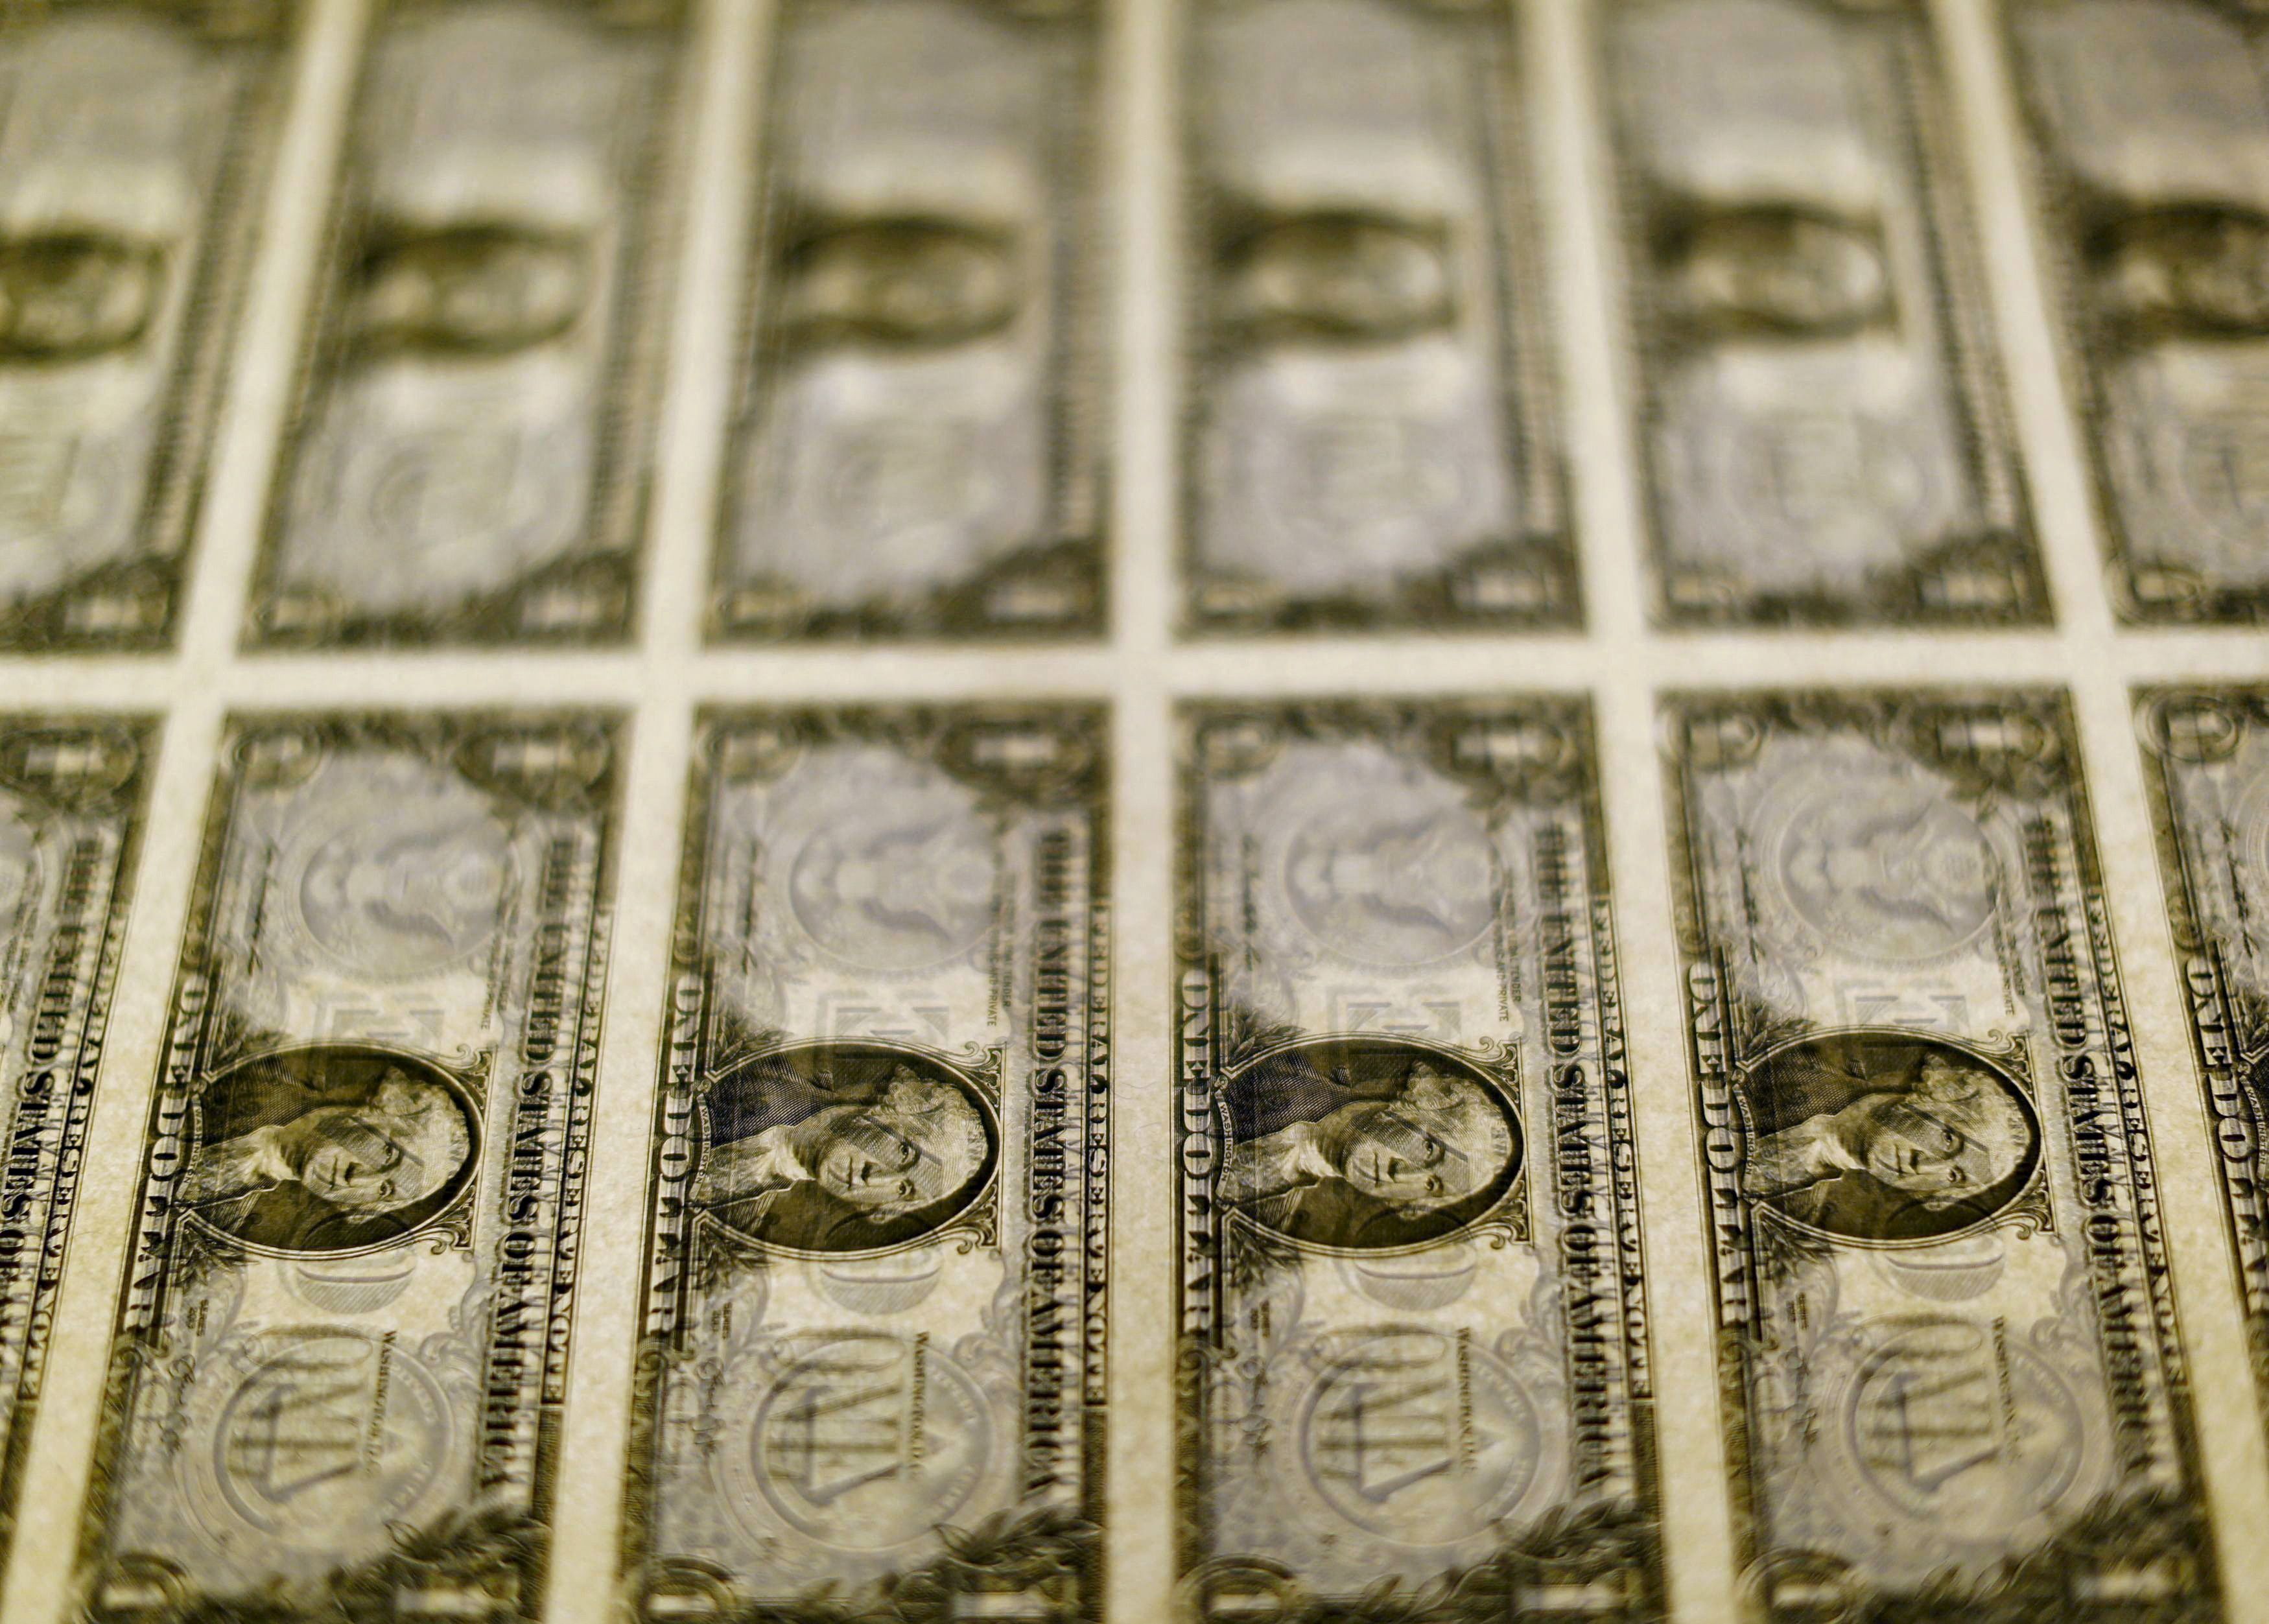 FILE PHOTO: United States one dollar bills are seen on a light table at the Bureau of Engraving and Printing in Washington in this November 14, 2014, file photo. REUTERS/Gary Cameron/File Photo